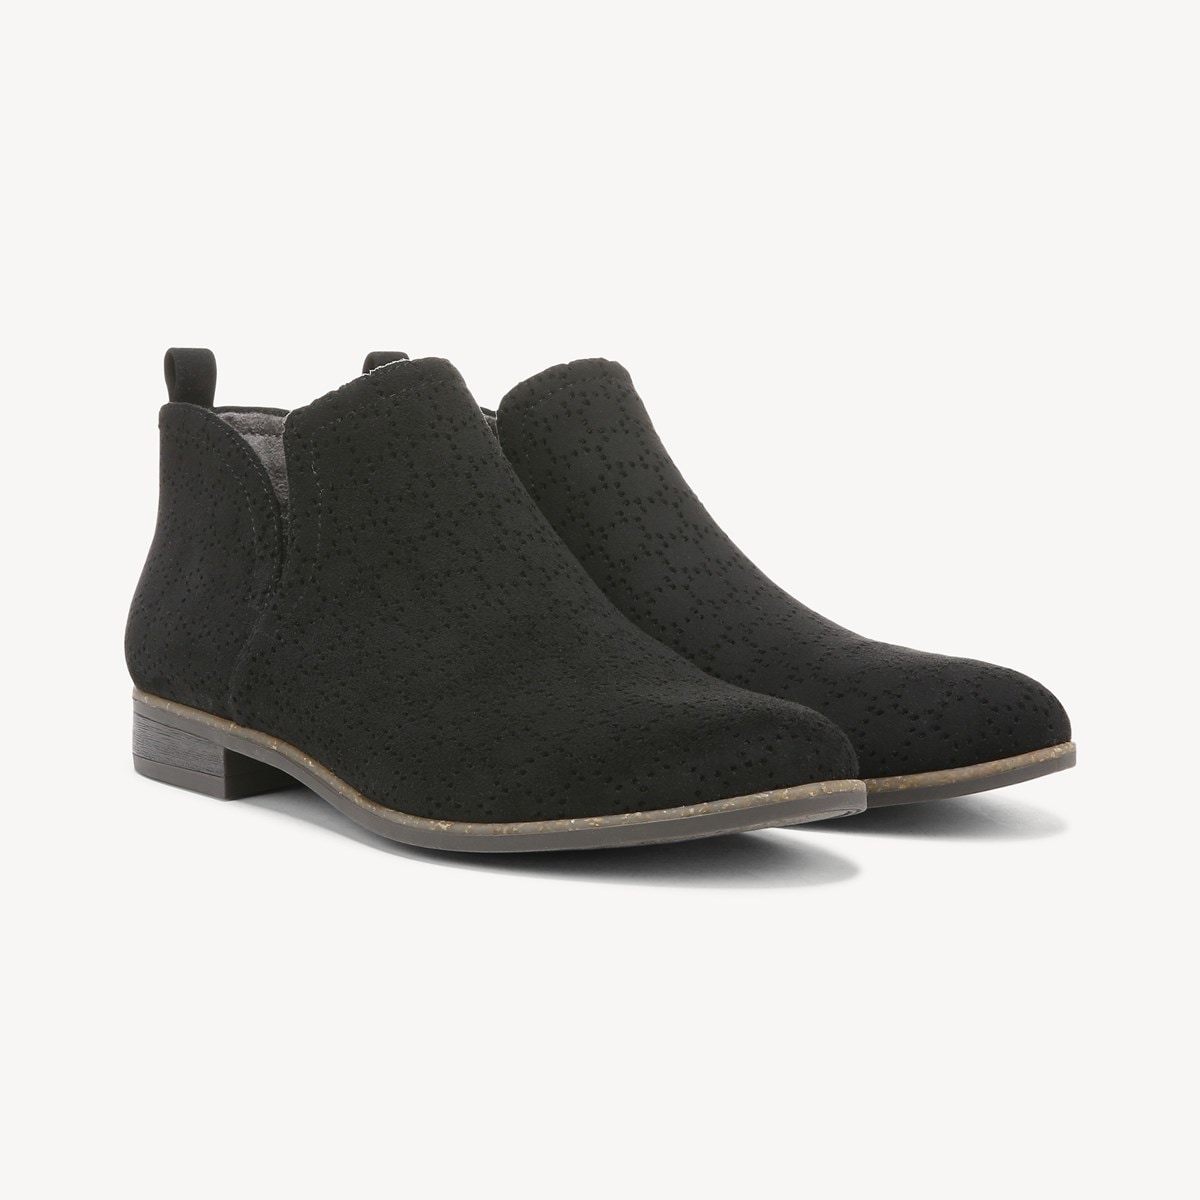 American Lifestyle Rate Bootie in Black 